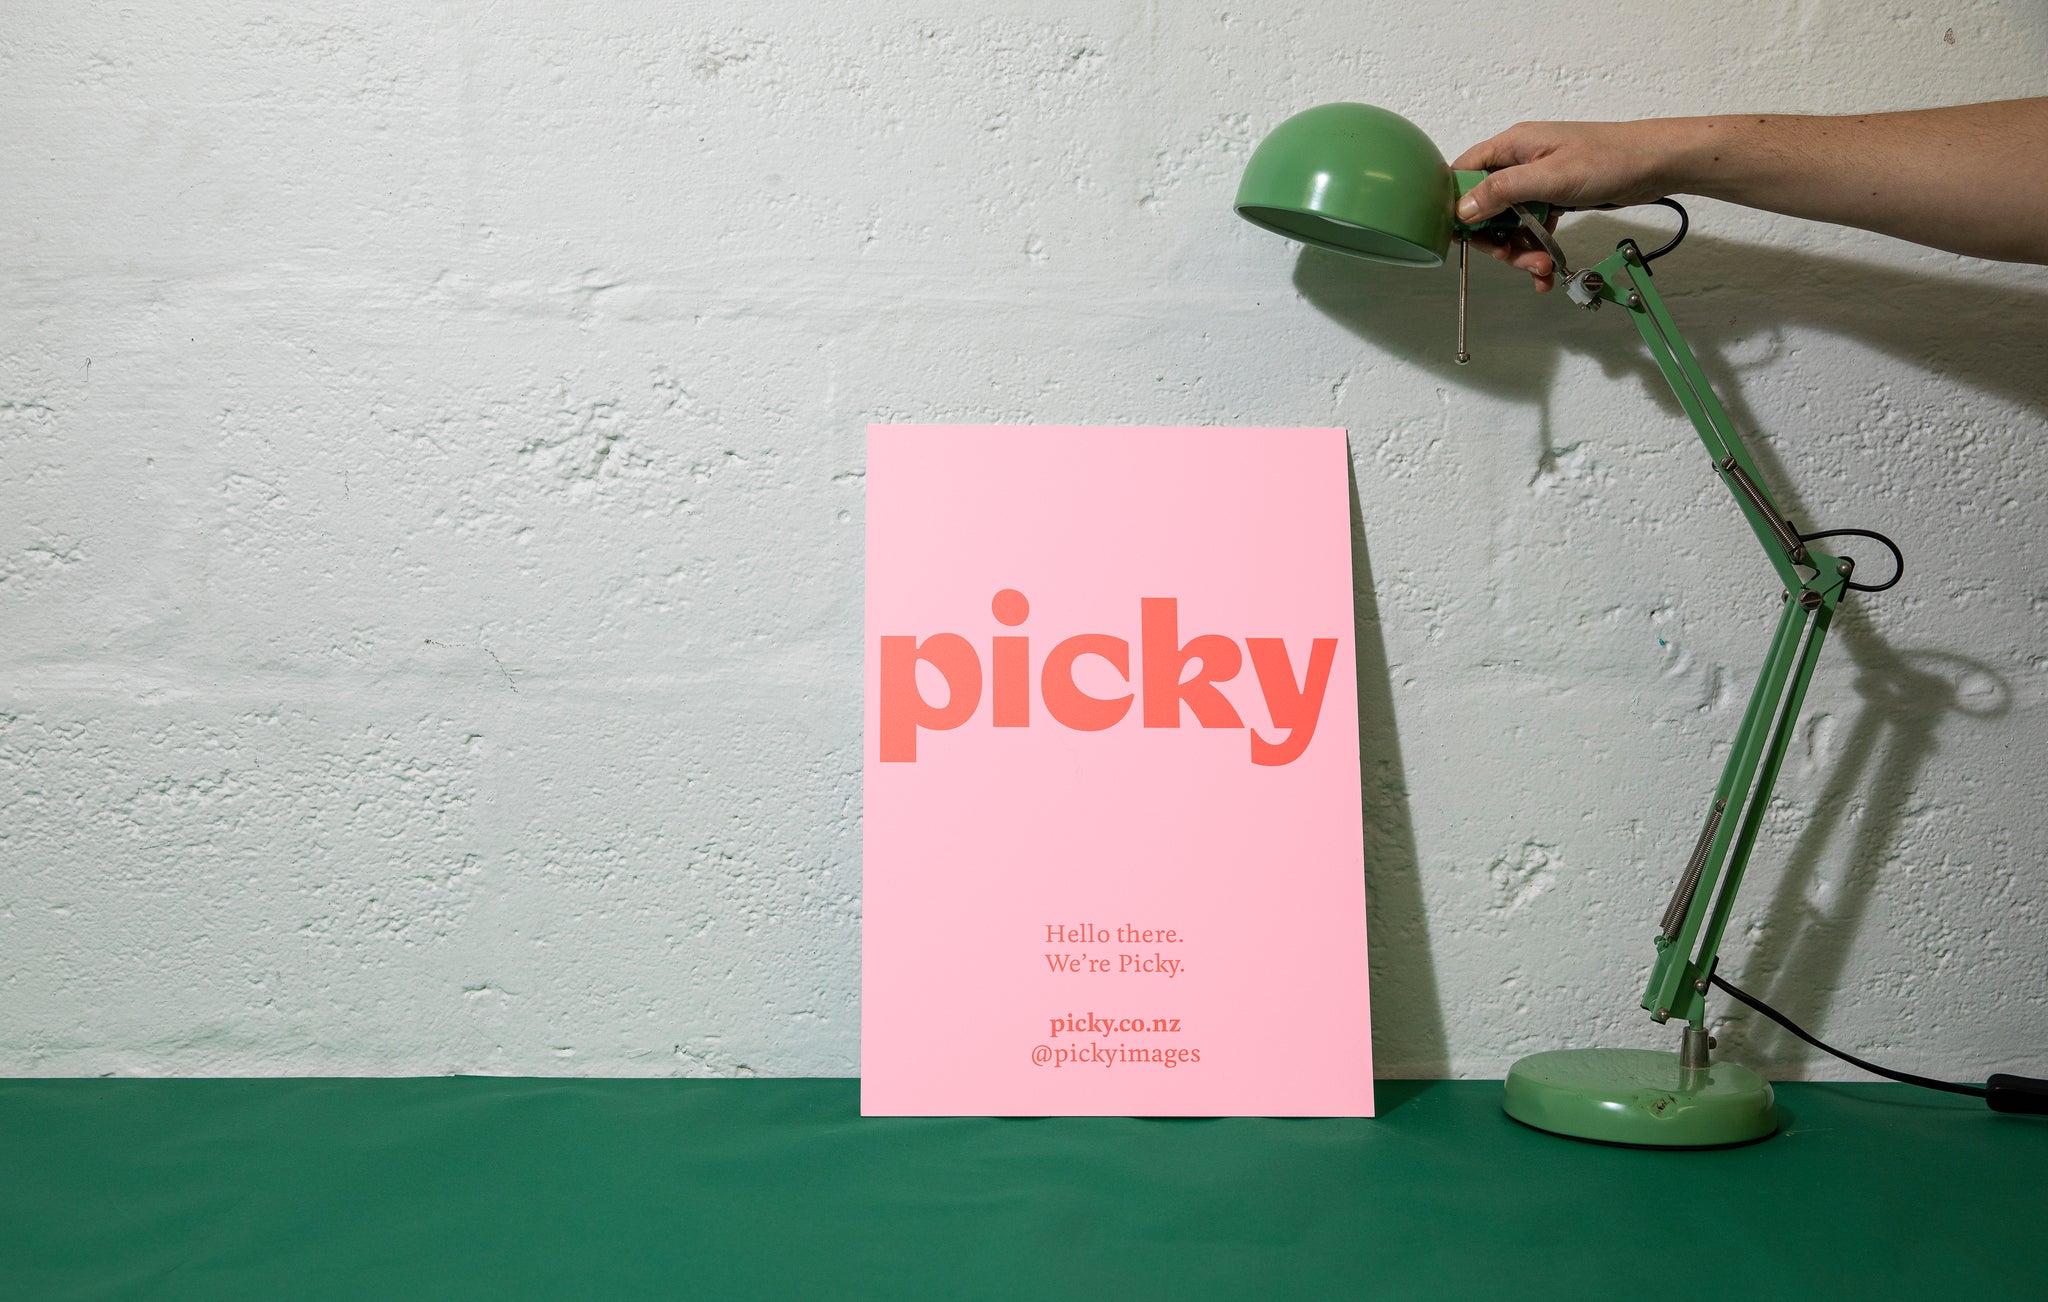 Landscape close-up of a hand holding a green lamp next to a large paper document in front of a white backdrop; it is pink with a large red mock-up advertisement.